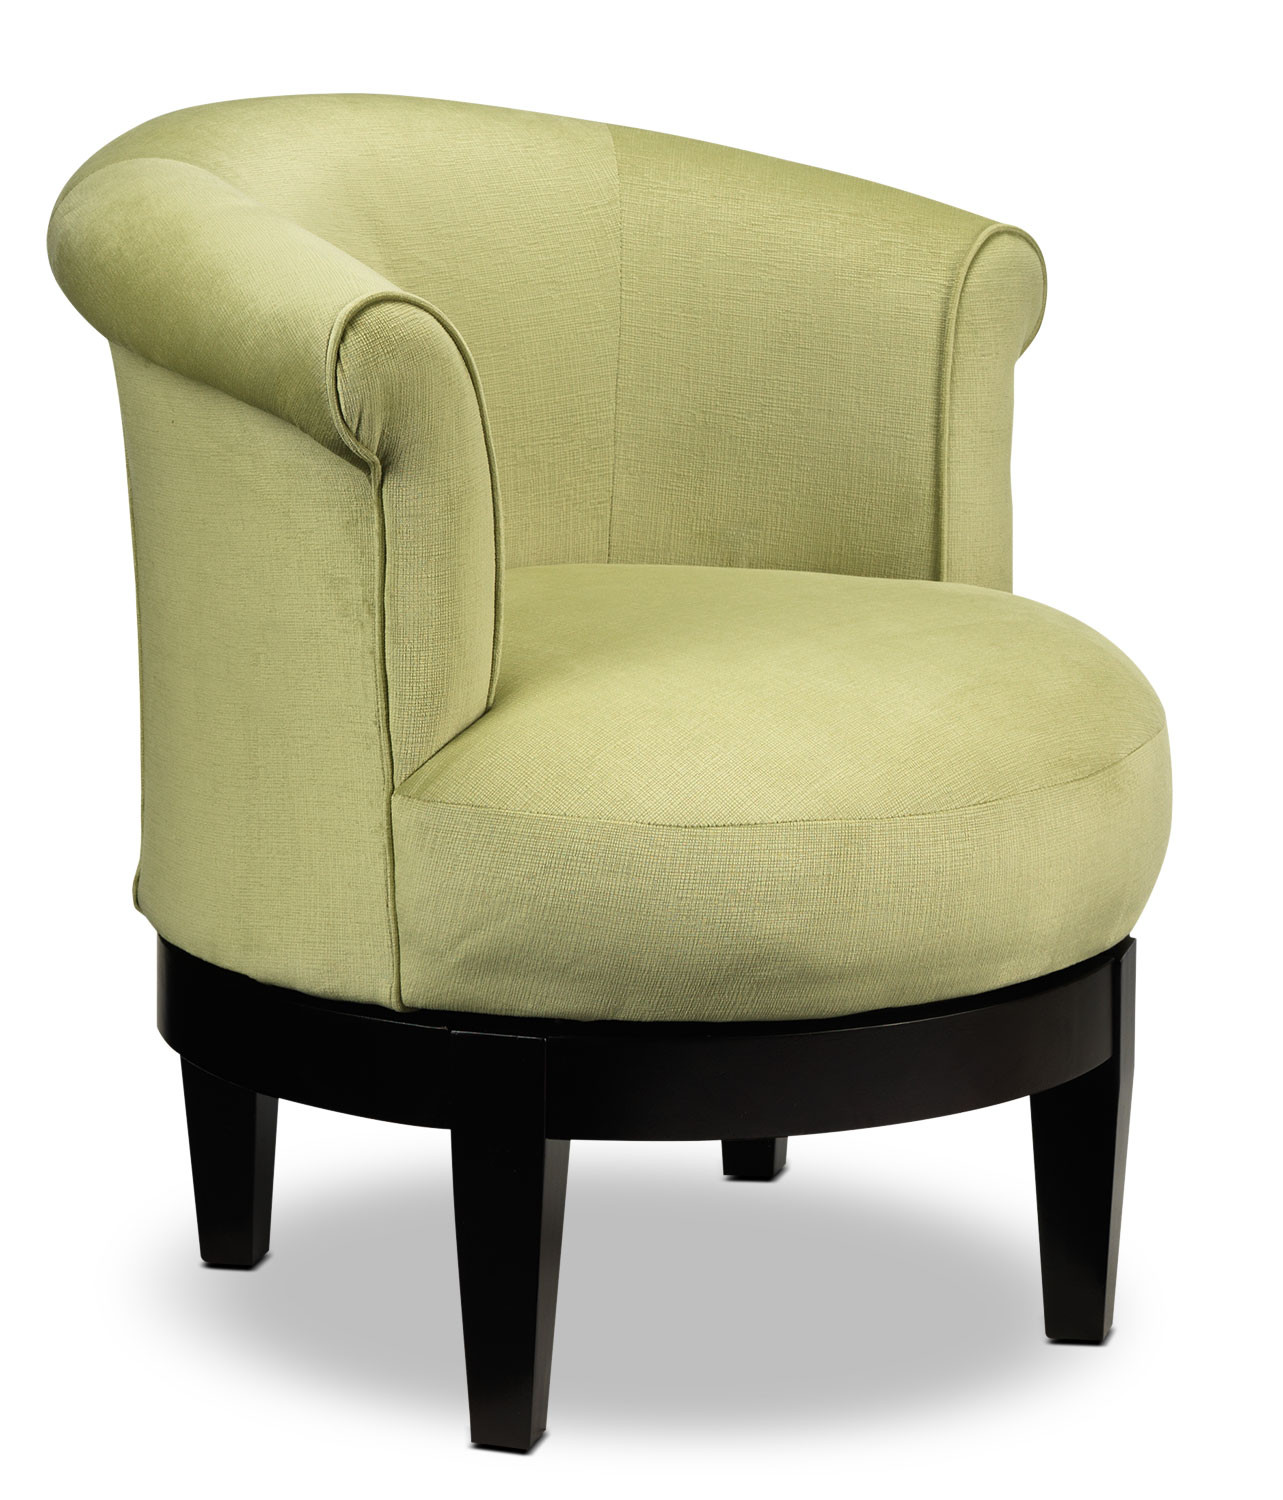 Swivel Chair Living Room
 Attica Accent Swivel Chair Lime